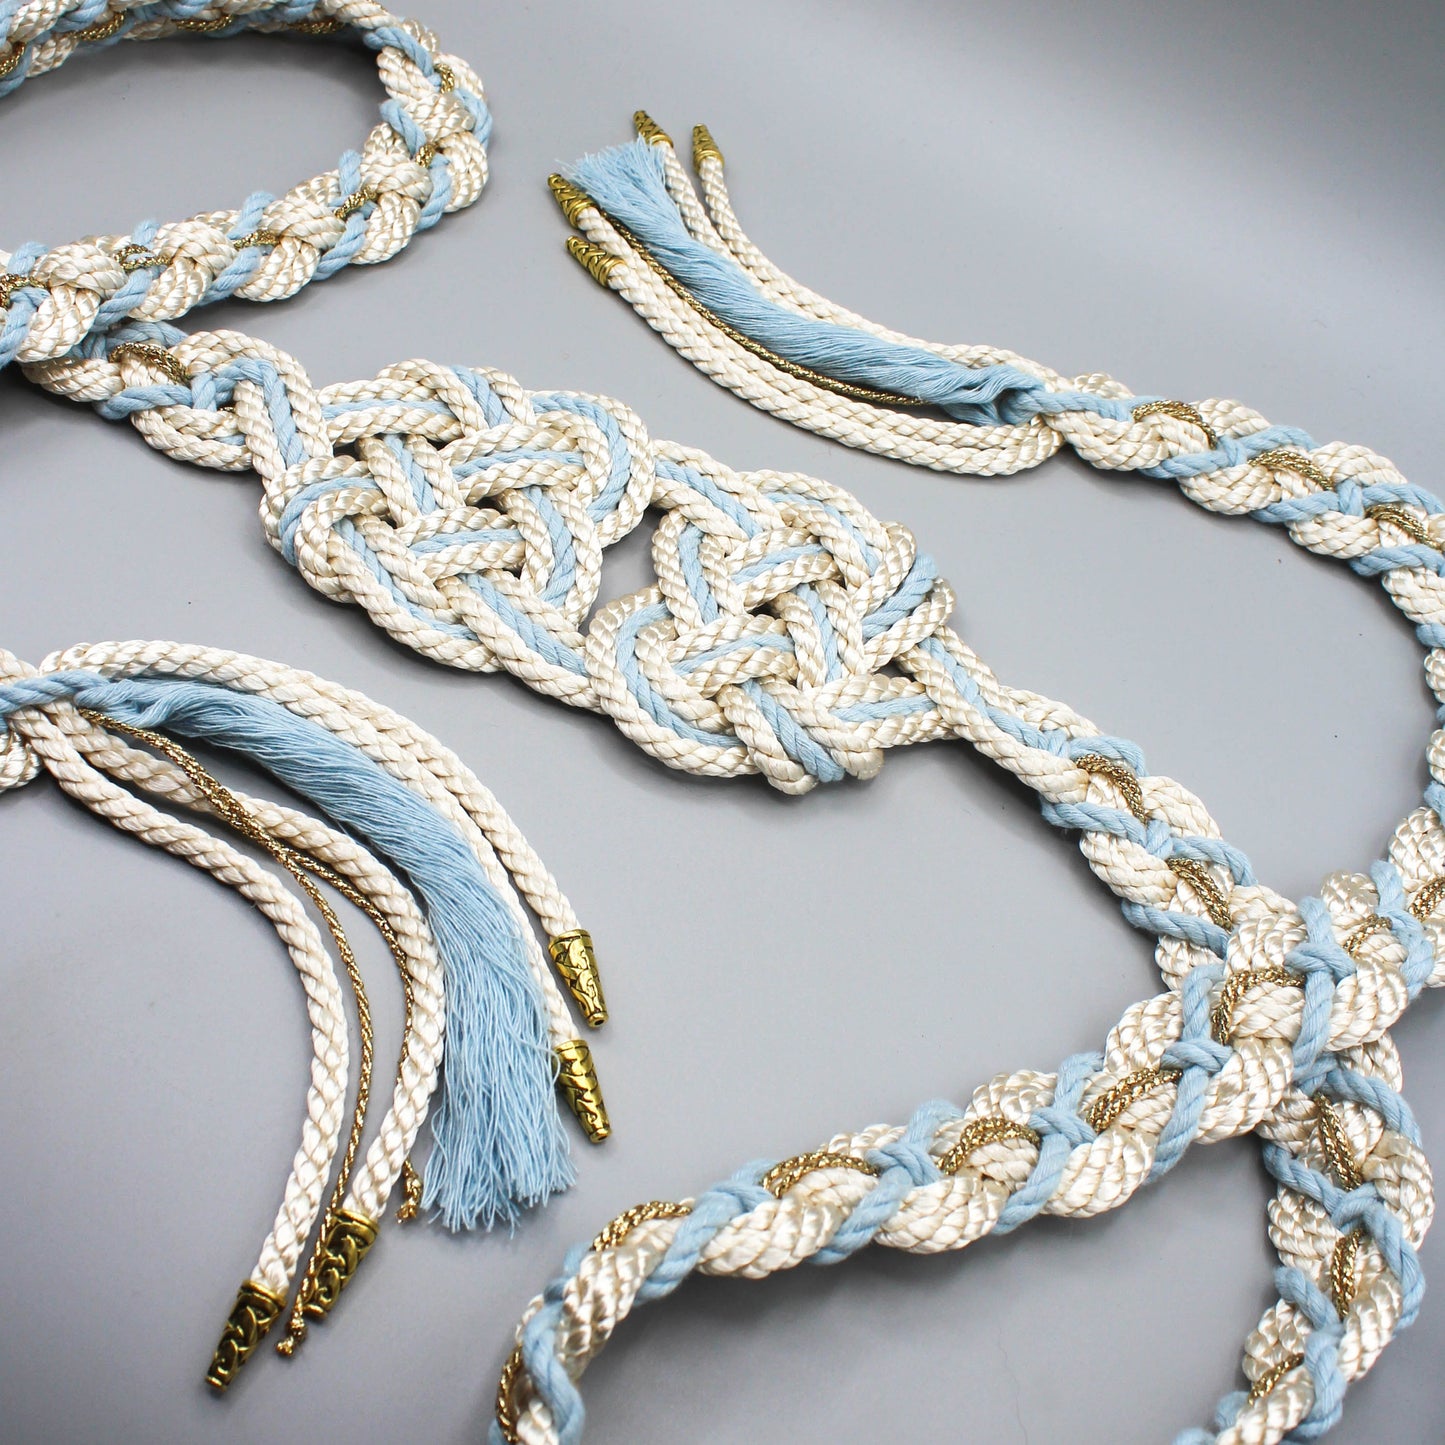 Hearts Entwined - Light Blue and Gold